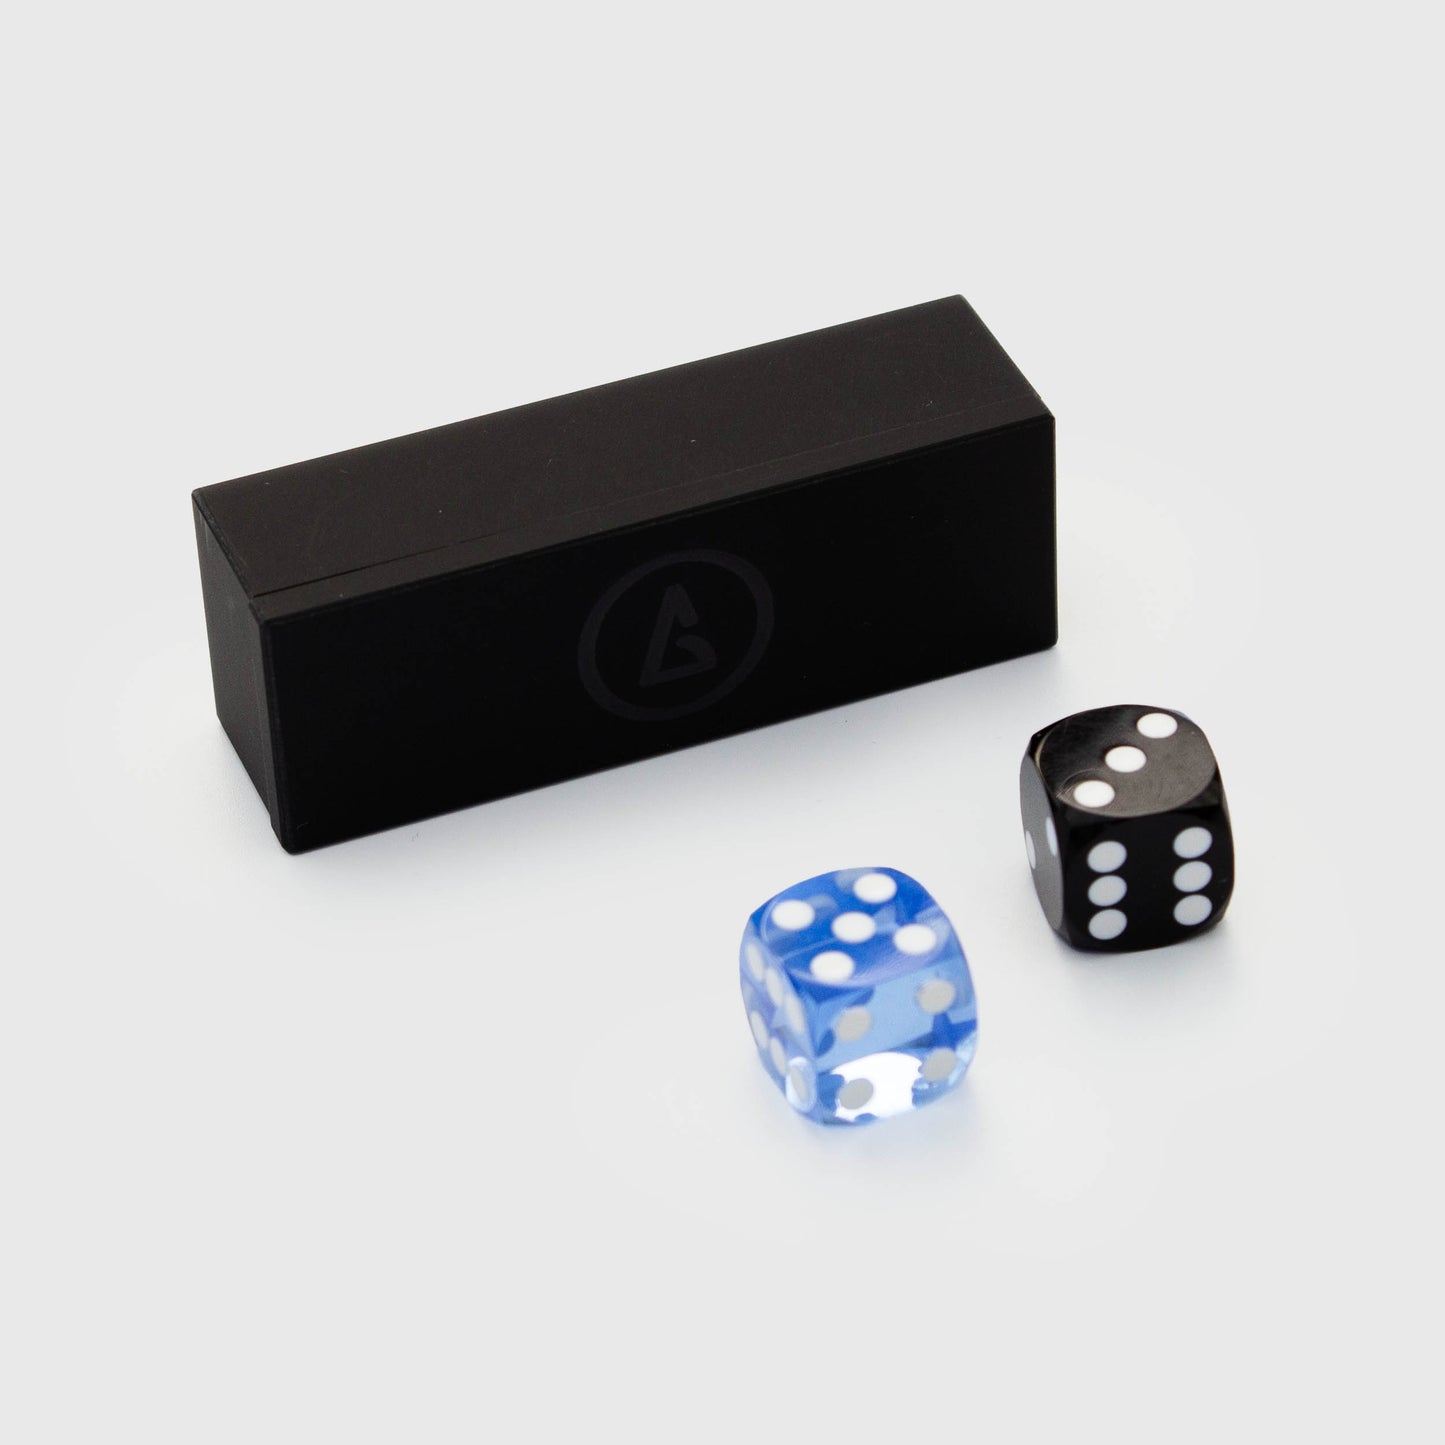 Dice Box, Holds 4 dice size 14.3mm (9/16”), by Backgammon Galaxy